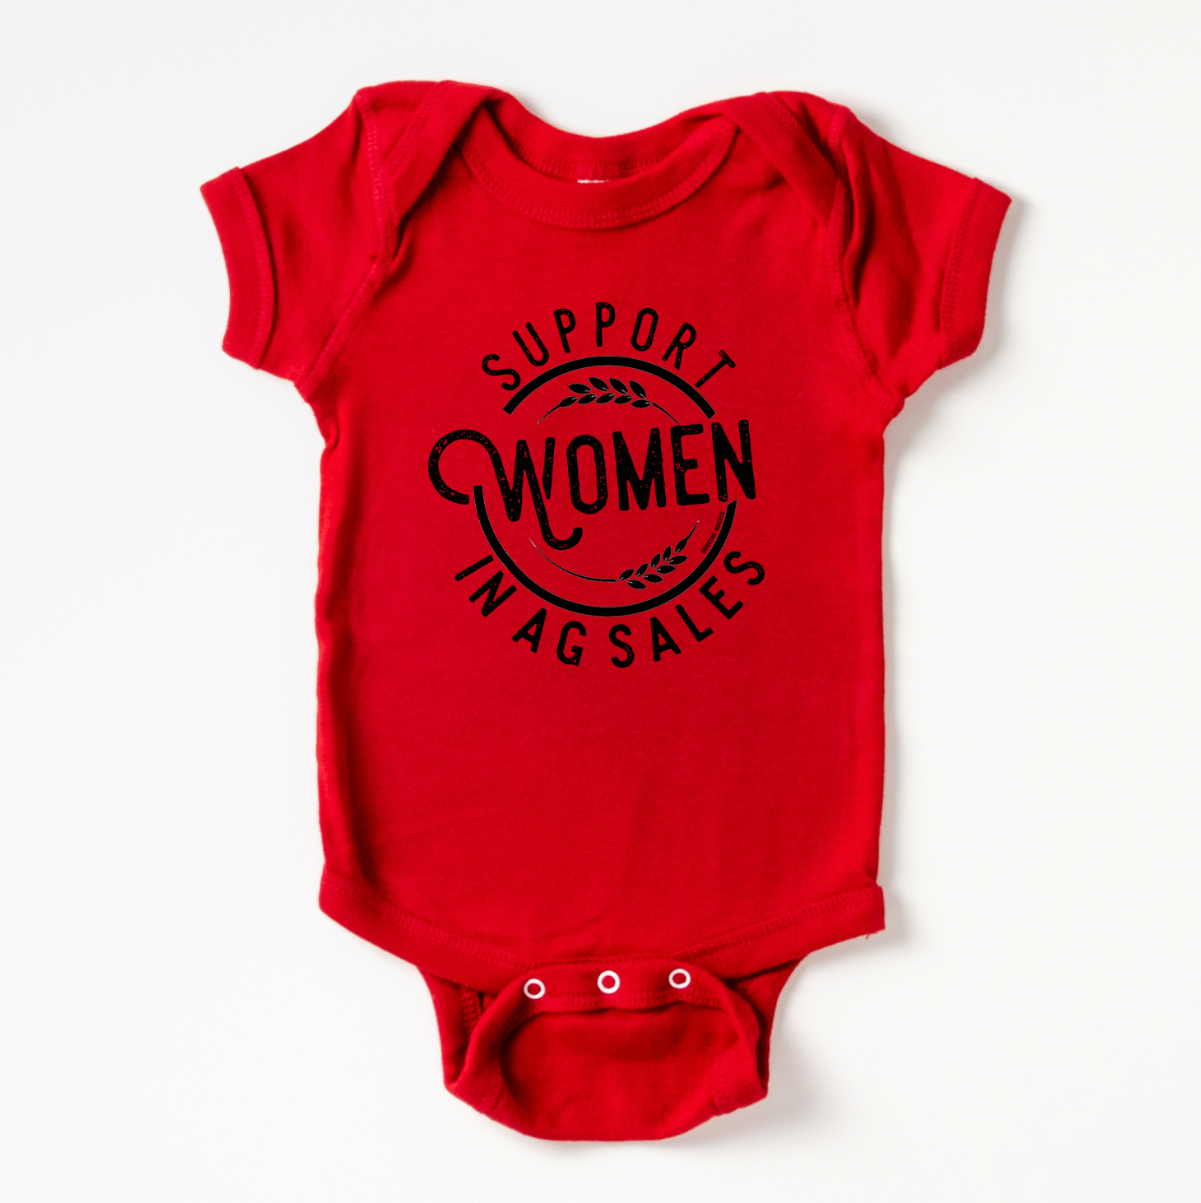 Support Women In Ag Sales One Piece/T-Shirt (Newborn - Youth XL) - Multiple Colors!